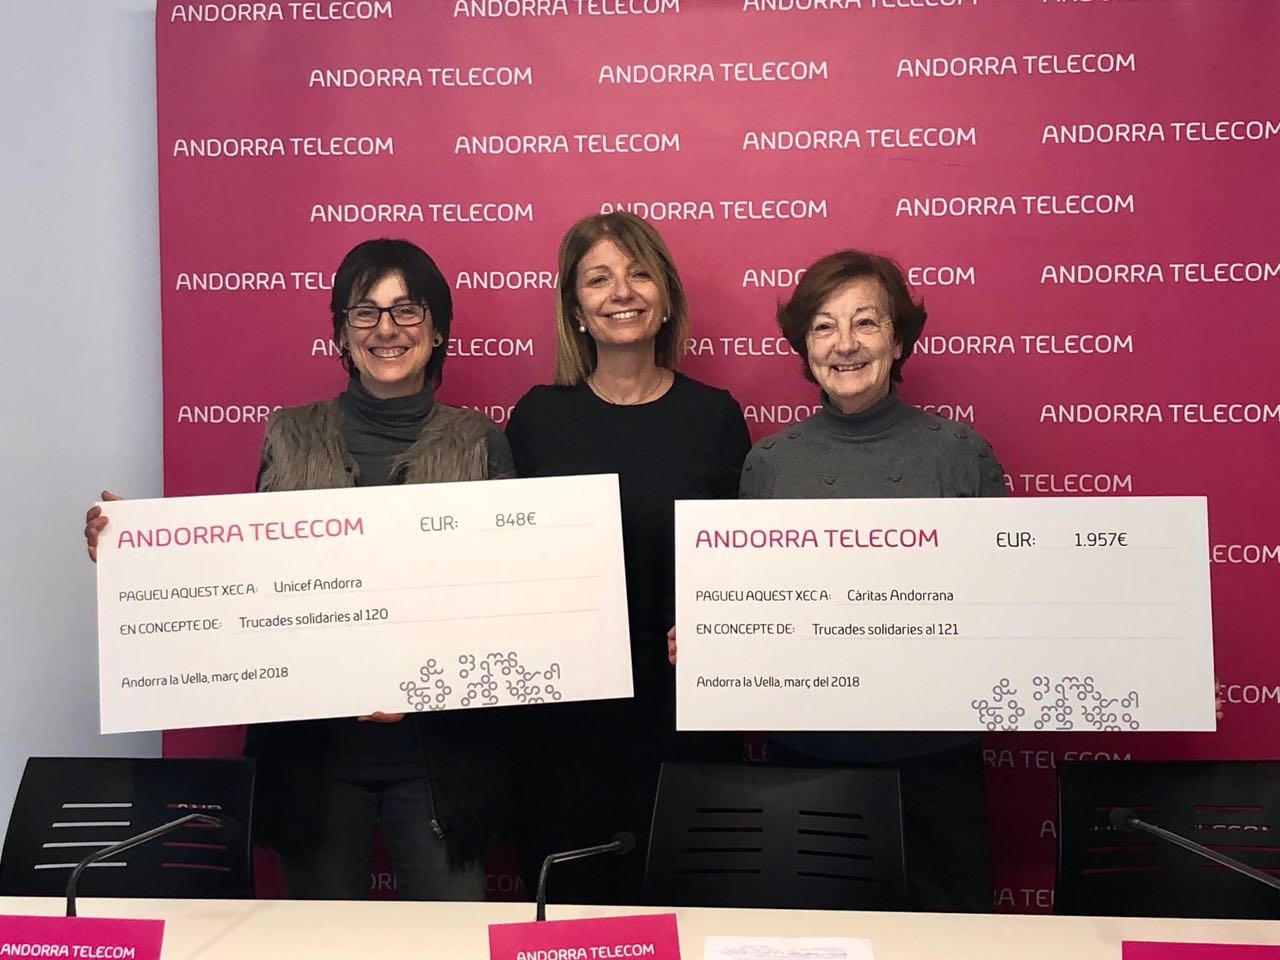 Andorra Telecom grants Unicef and Càritas the funds raised through the solidary numbers 120 and 121